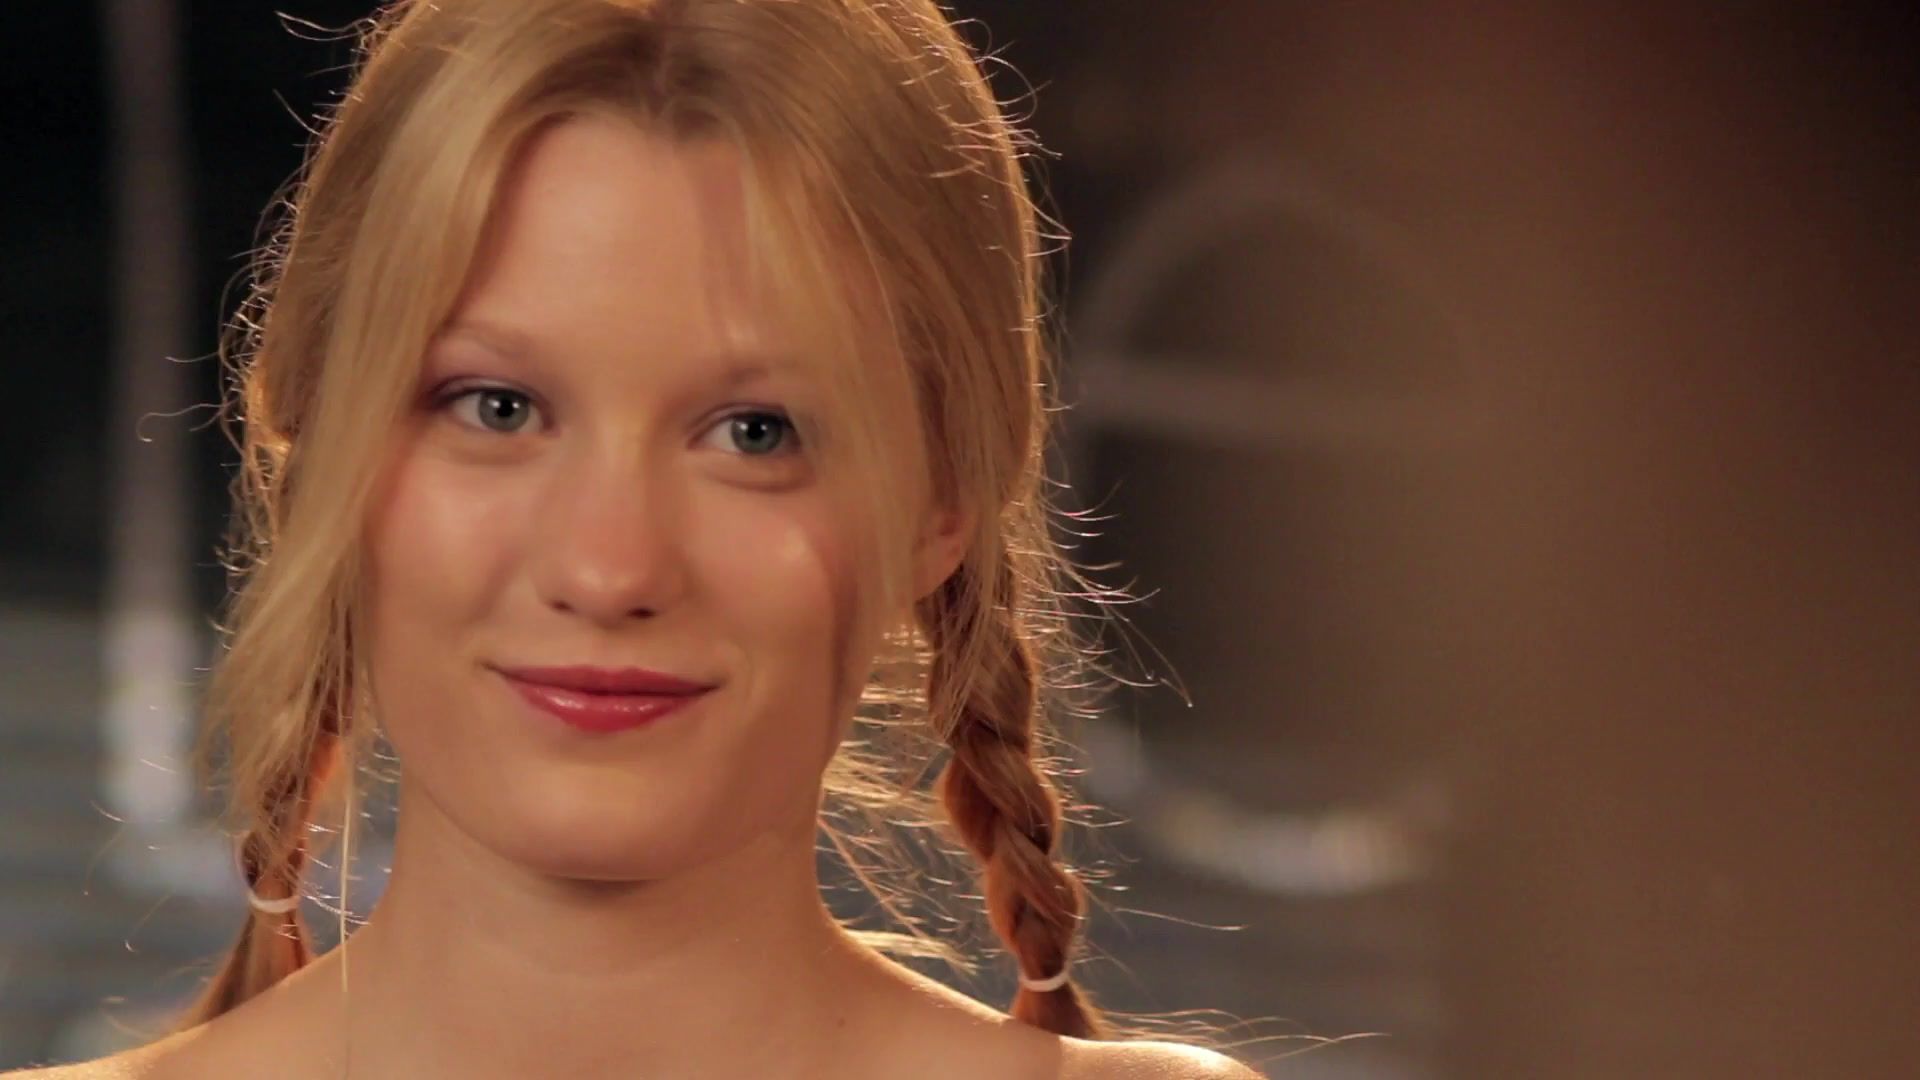 Amature Sex Tapes Celebs Nudes Scene and Sex video with naked Ashley Hinshaw - About Cherry (2012) Cogida - 1